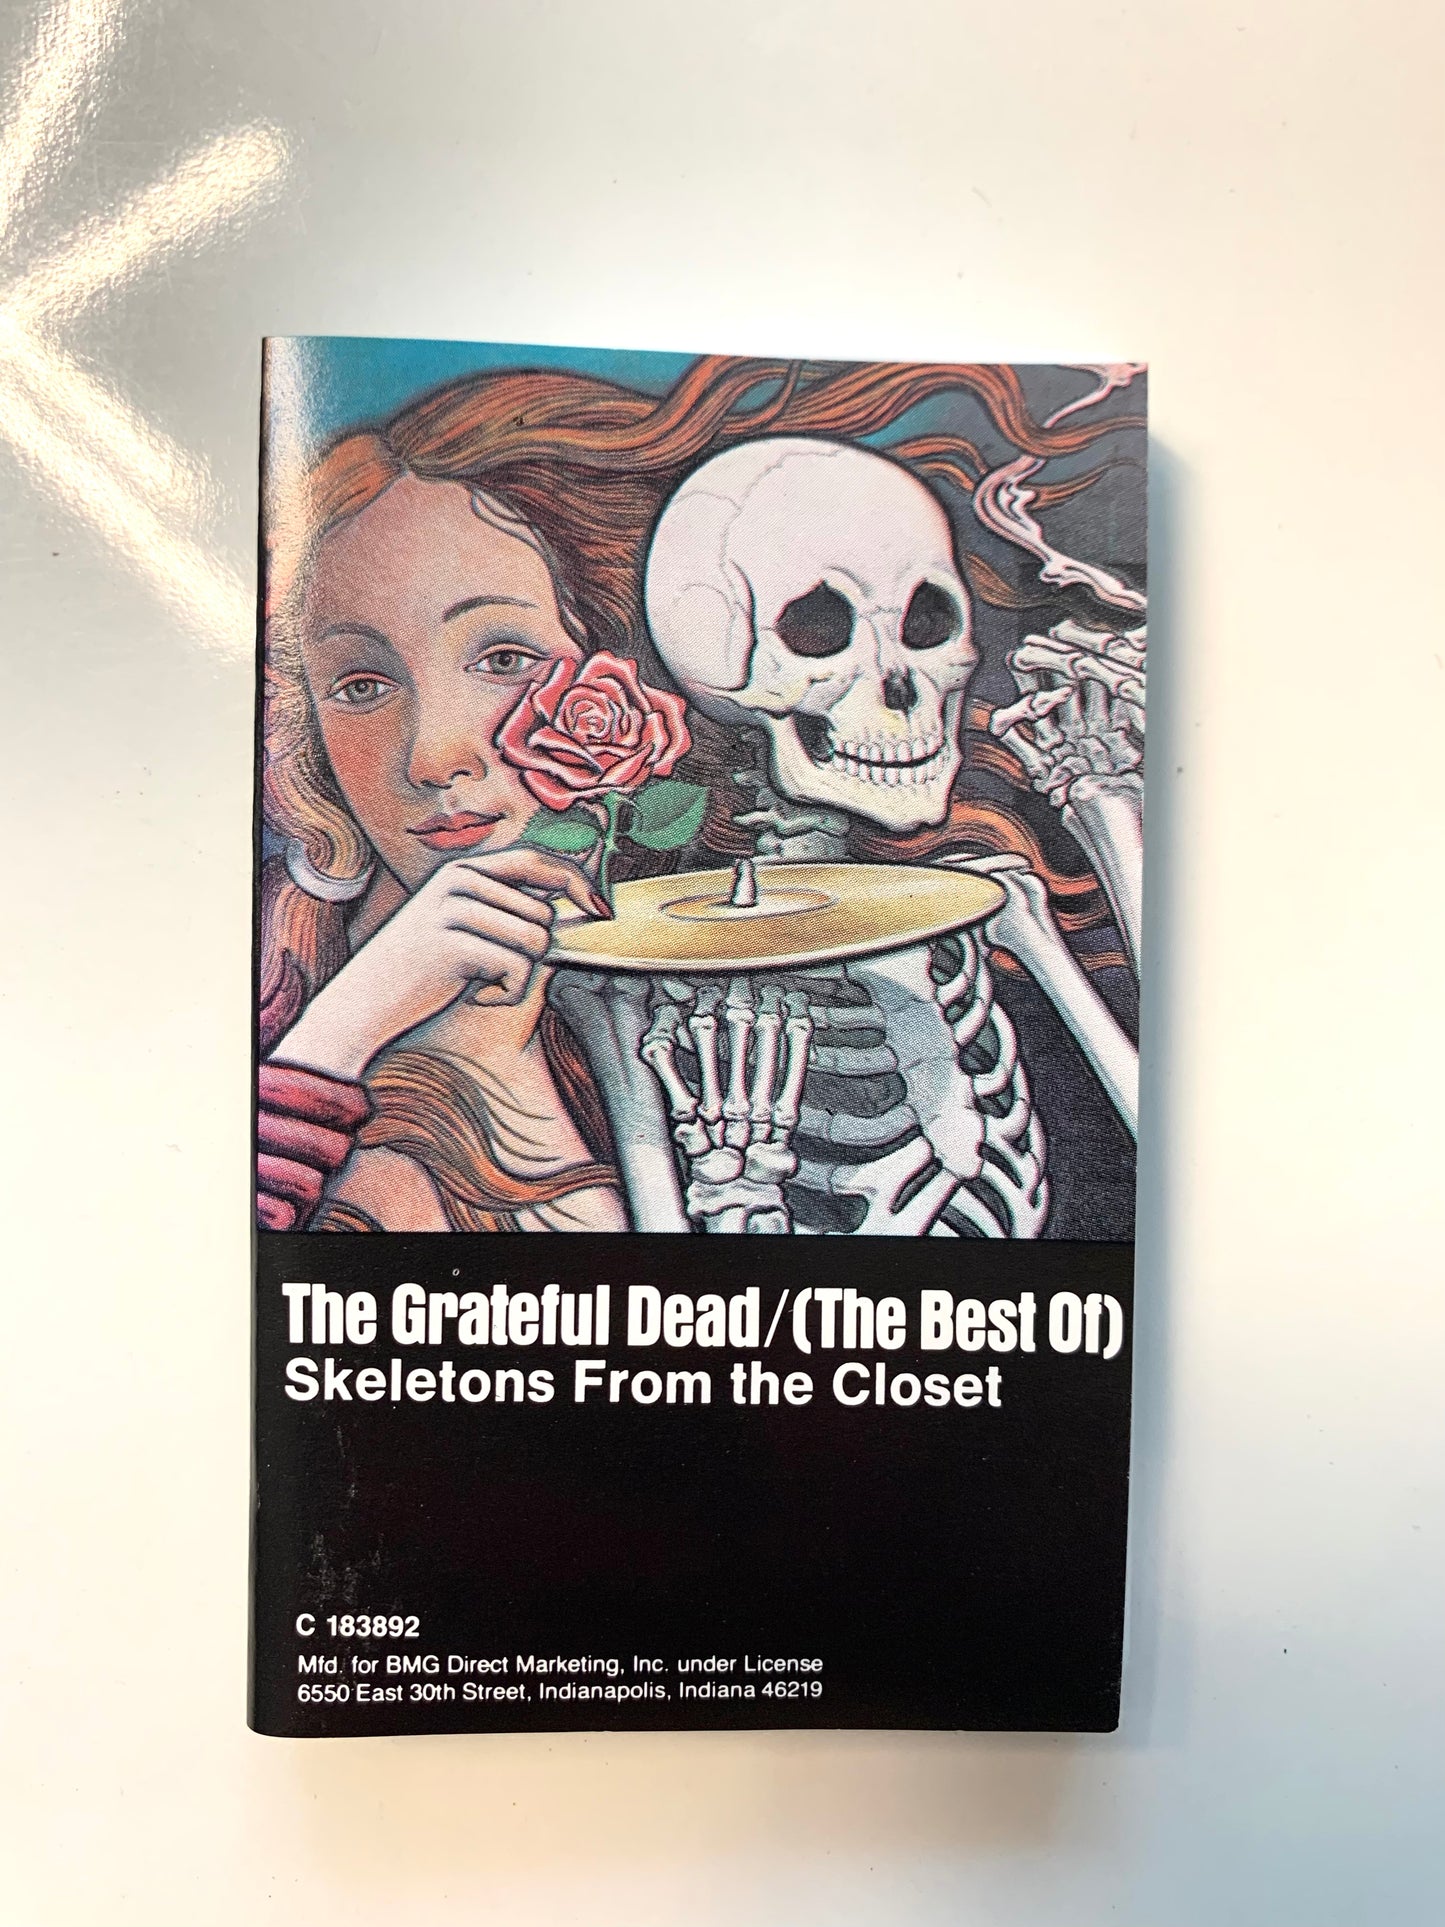 The Grateful Dead, Skeletons From the Closet